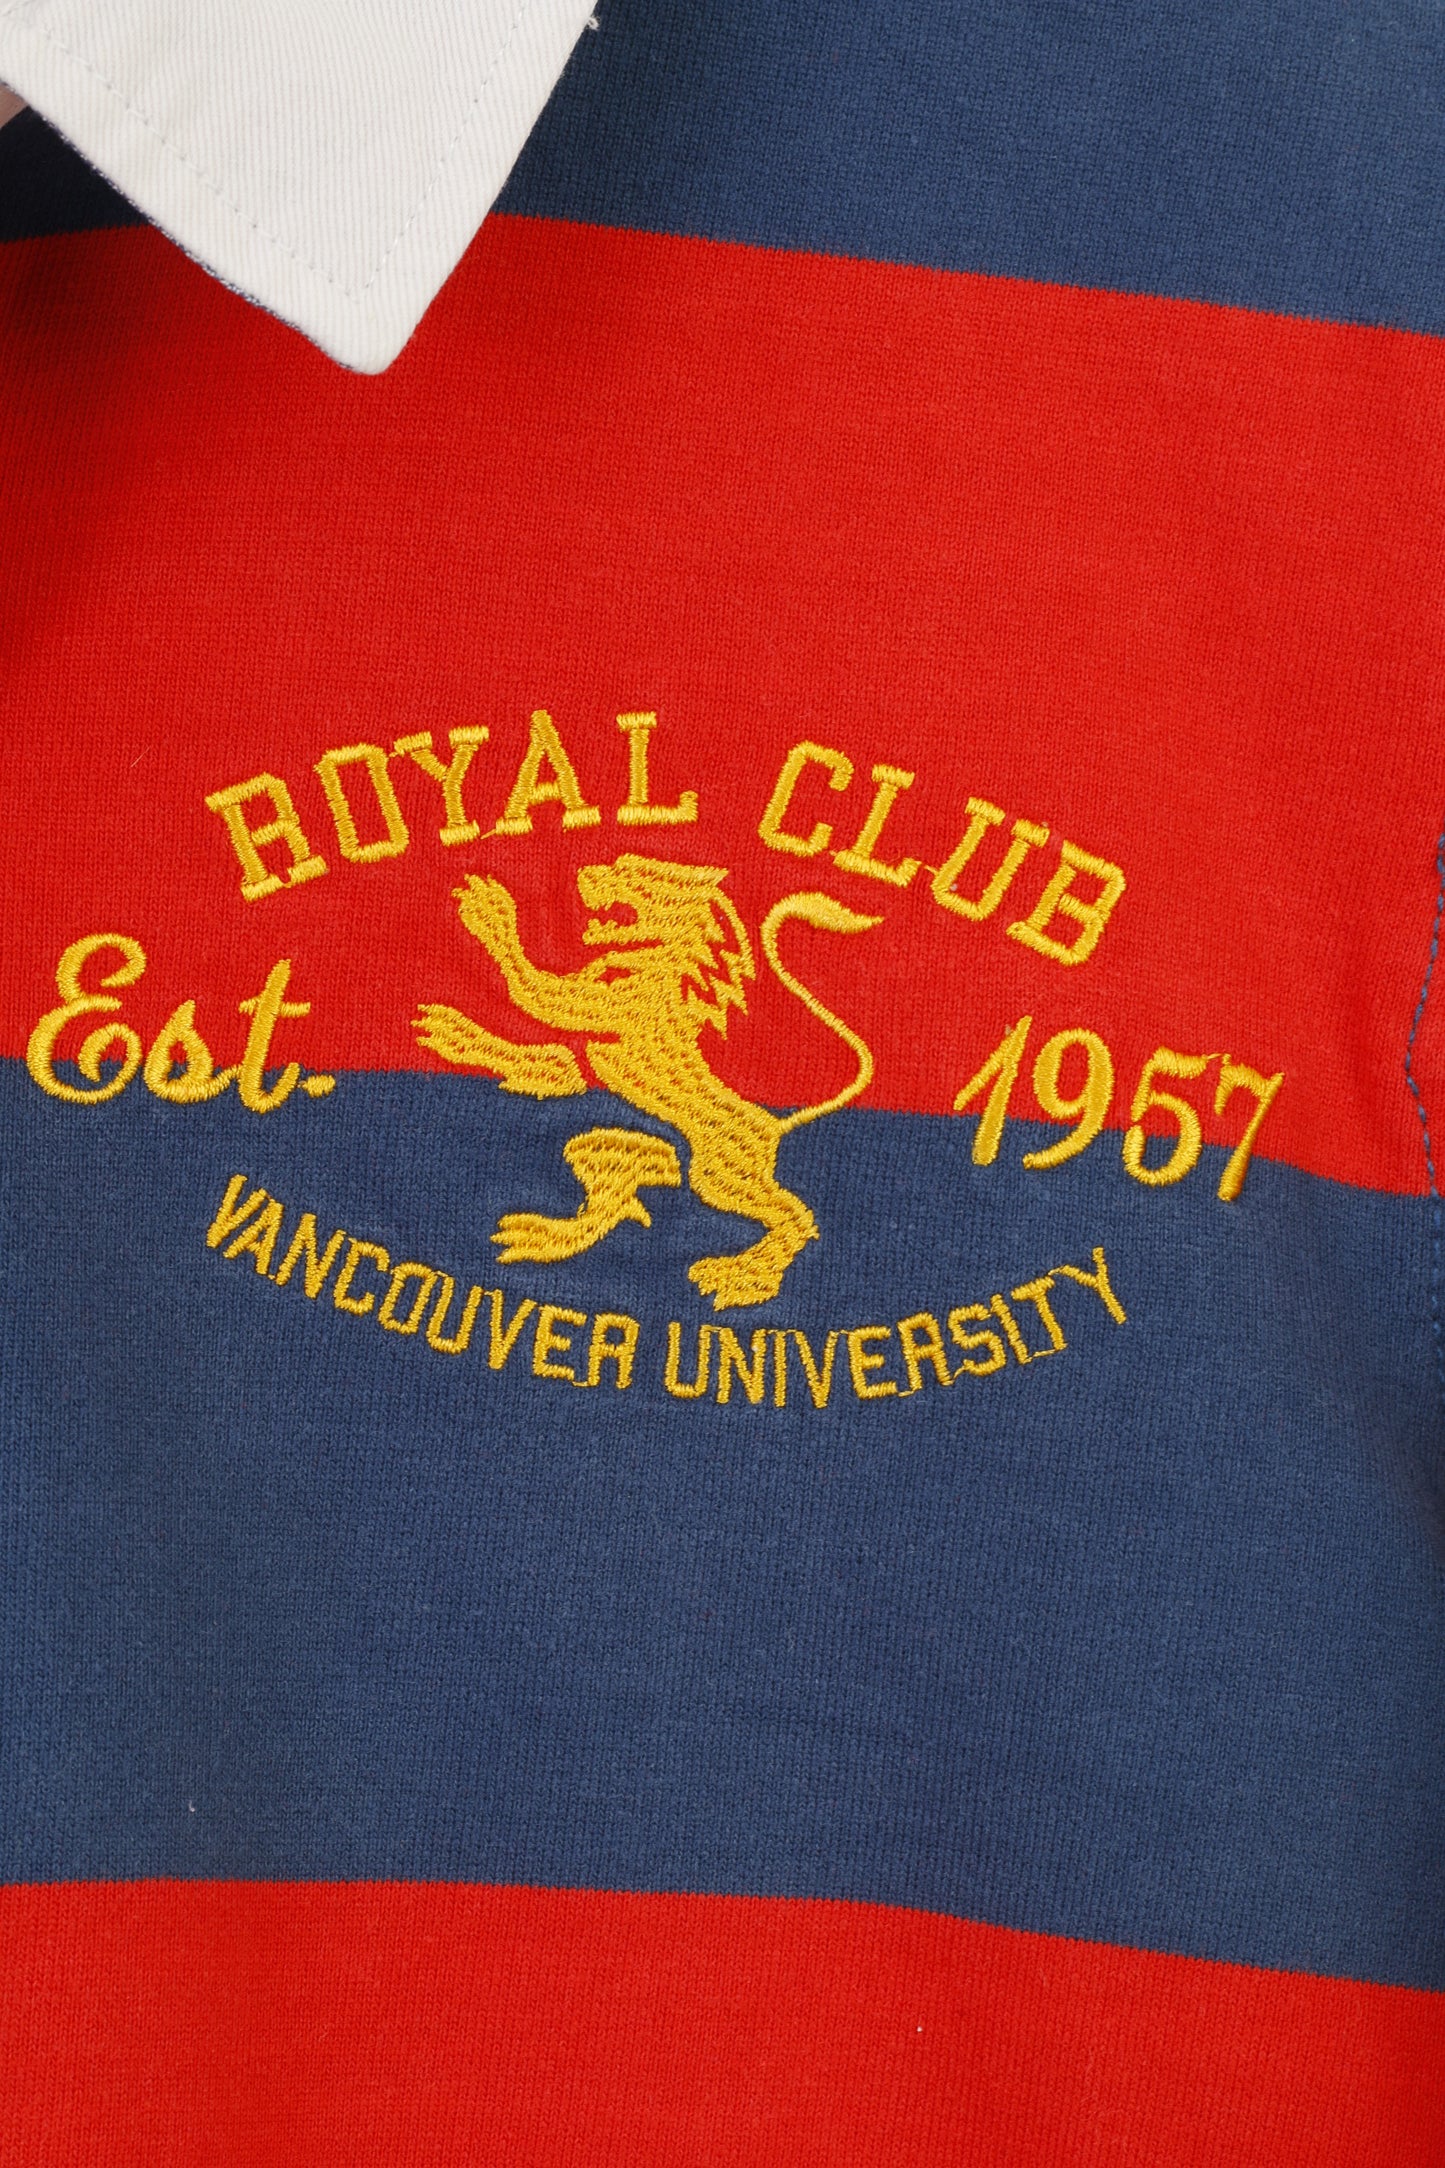 Polo Kids By Lindex Boys 158 Polo a maniche lunghe in cotone a righe Blu scuro Rosso Vancouver University